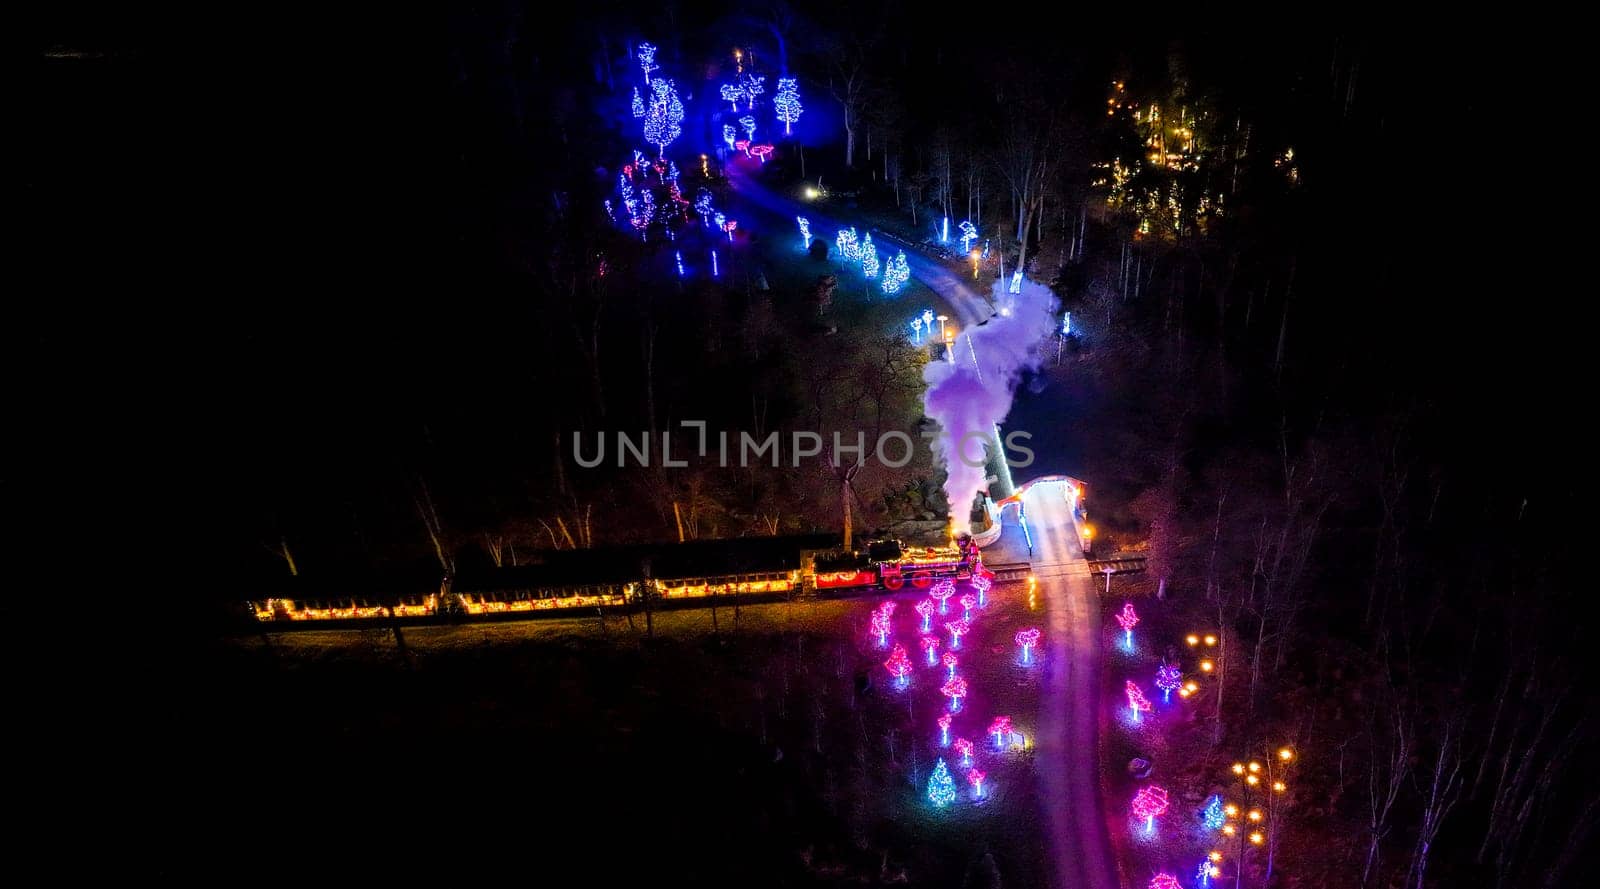 Overhead Night View Of A Colorful Light-Festooned Train Emitting Steam As It Travels Through A Dark, Tree-Lined Area.